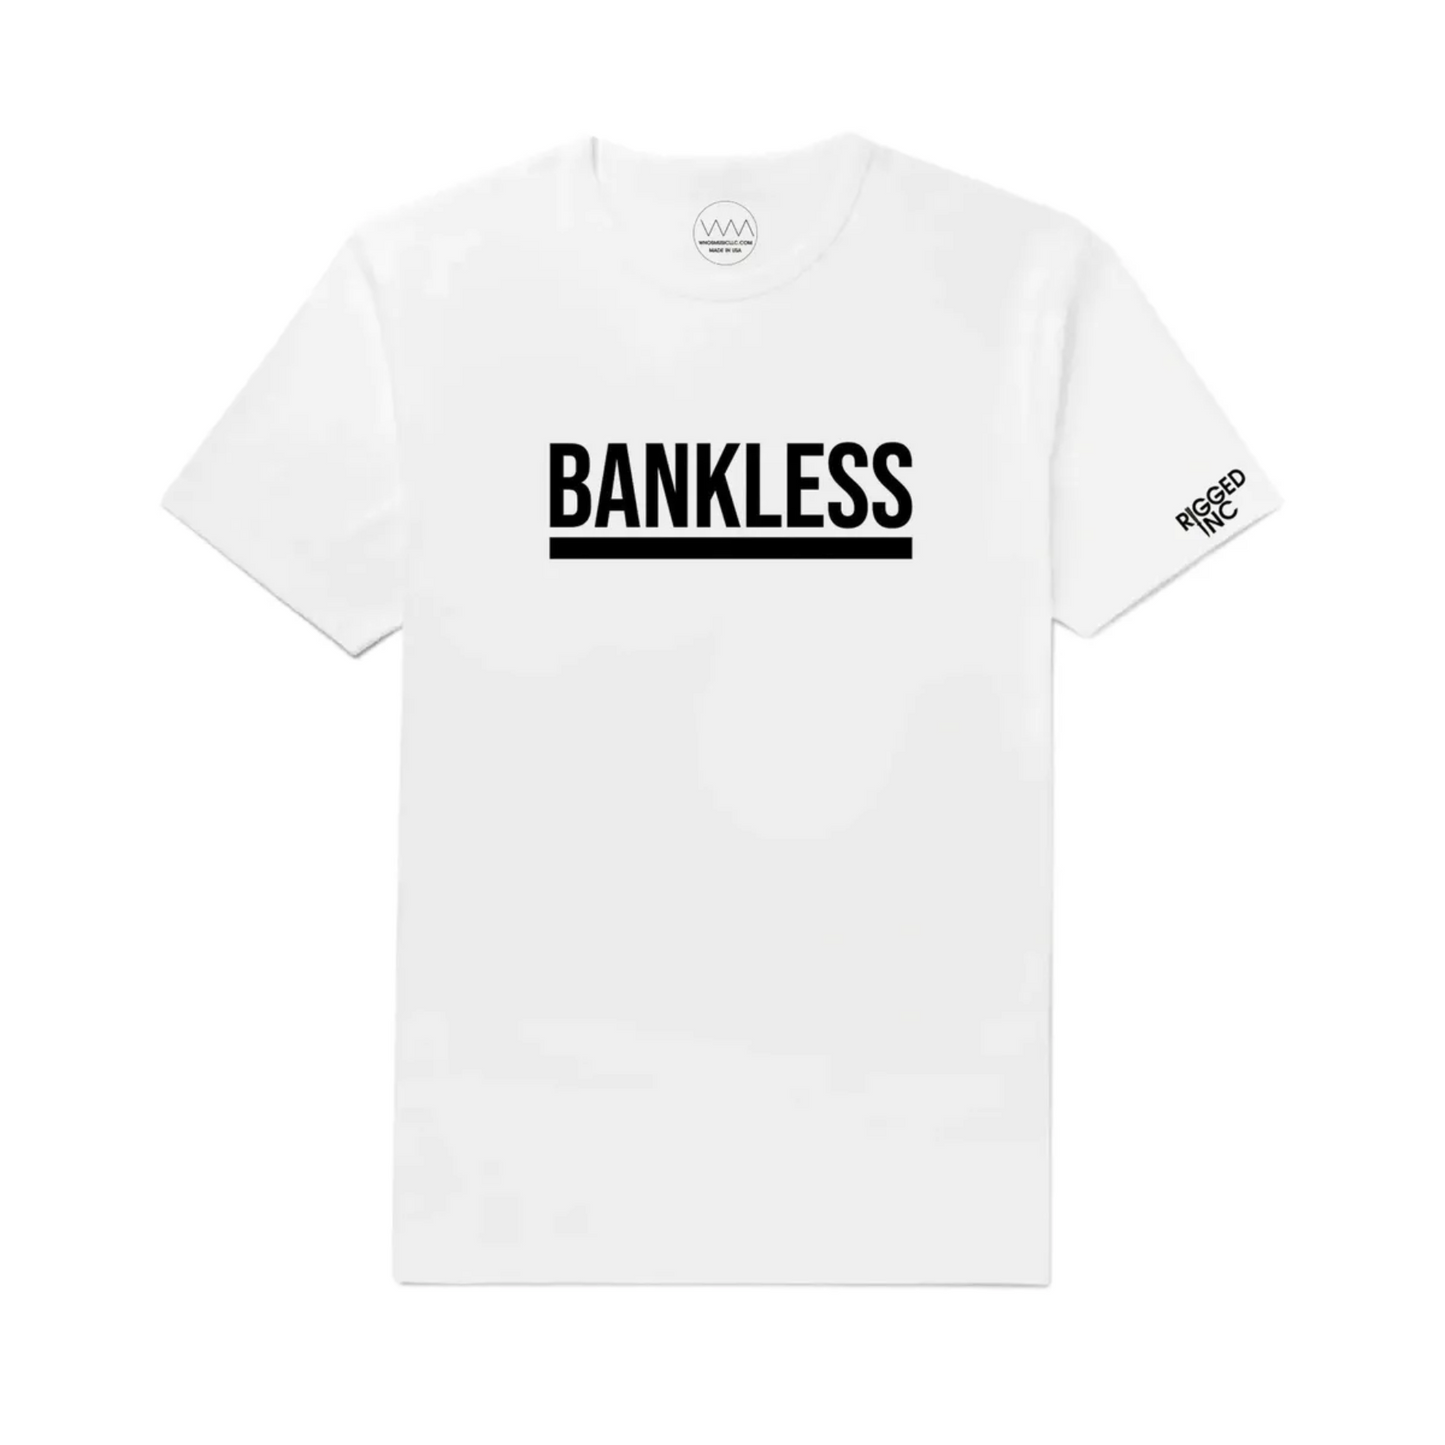 Bankless (T-Shirt)